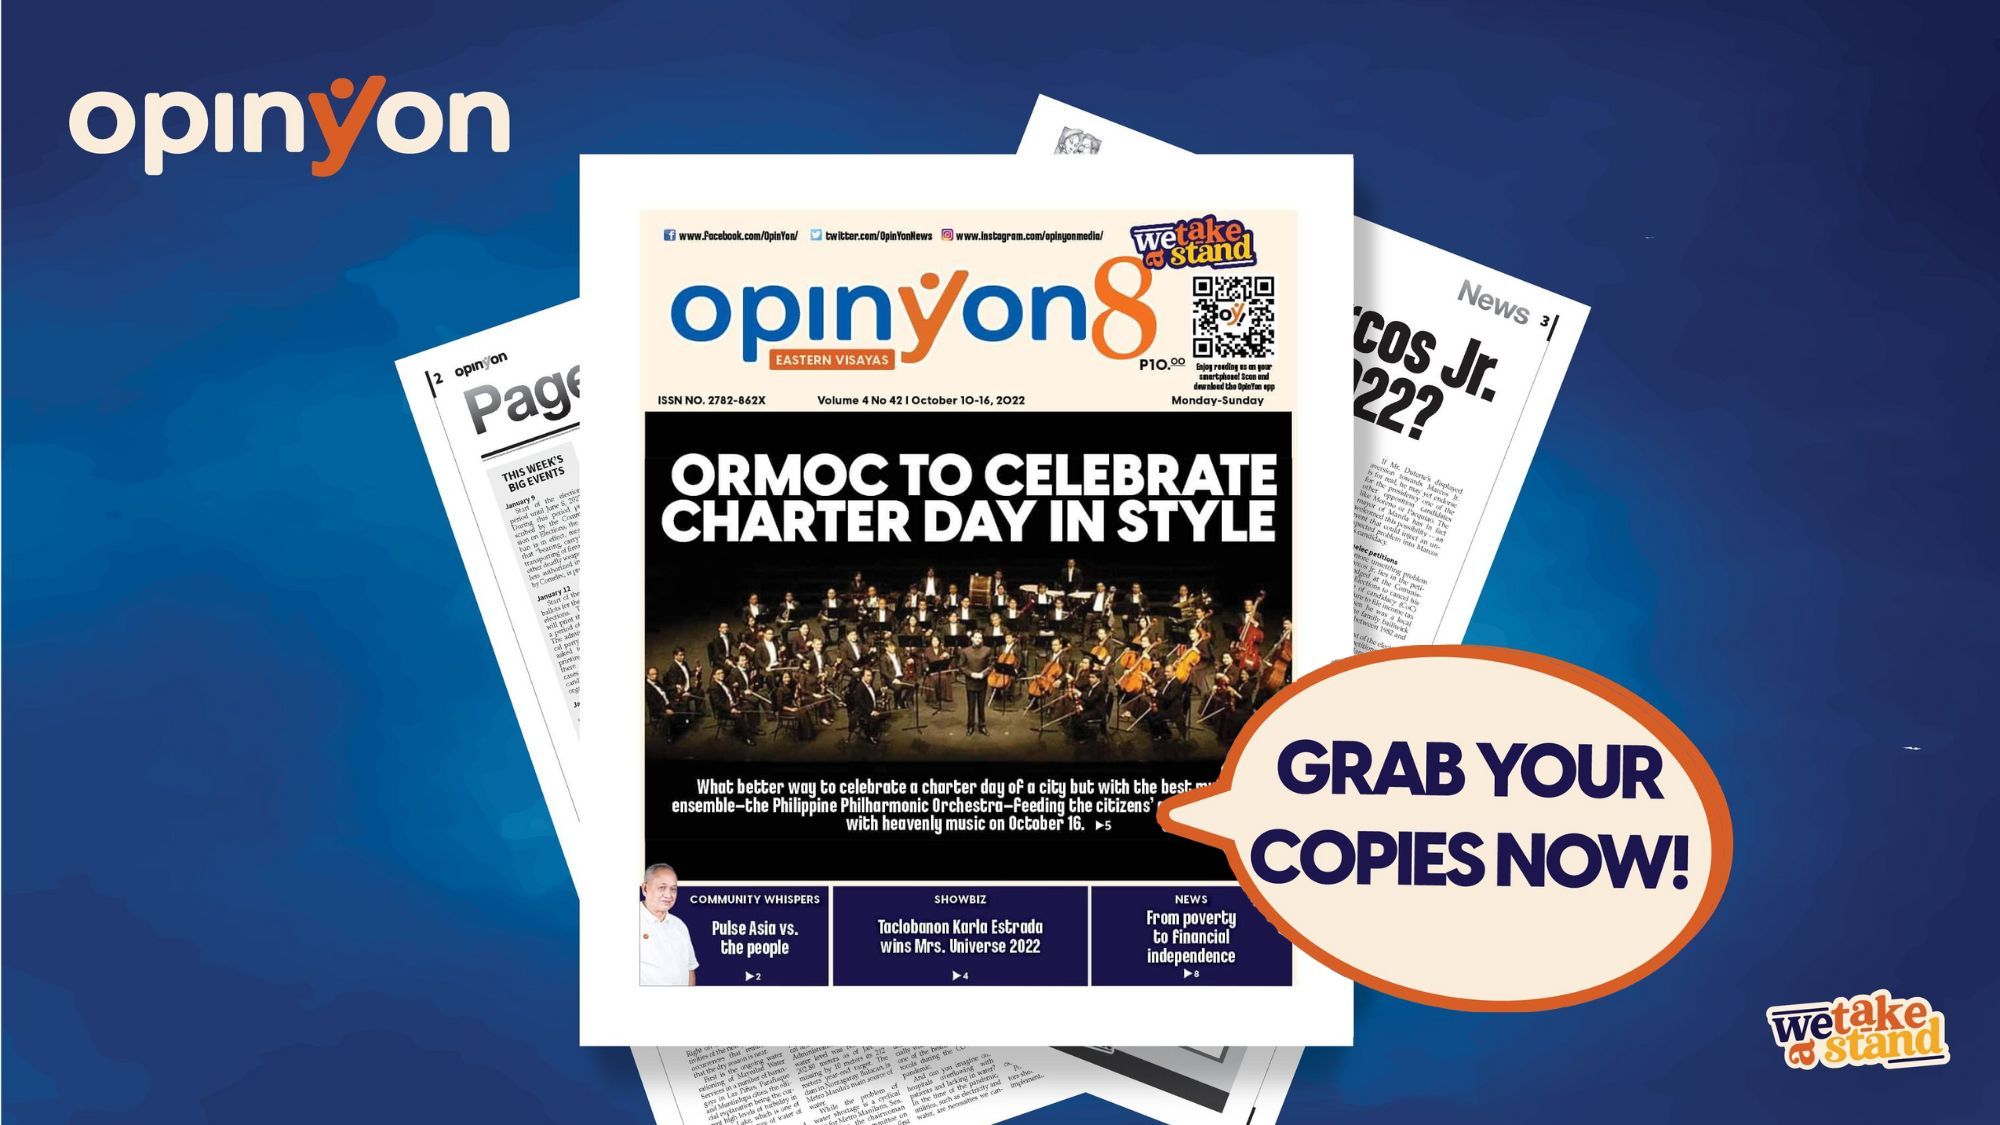 Ormoc to celebrate charter day in style